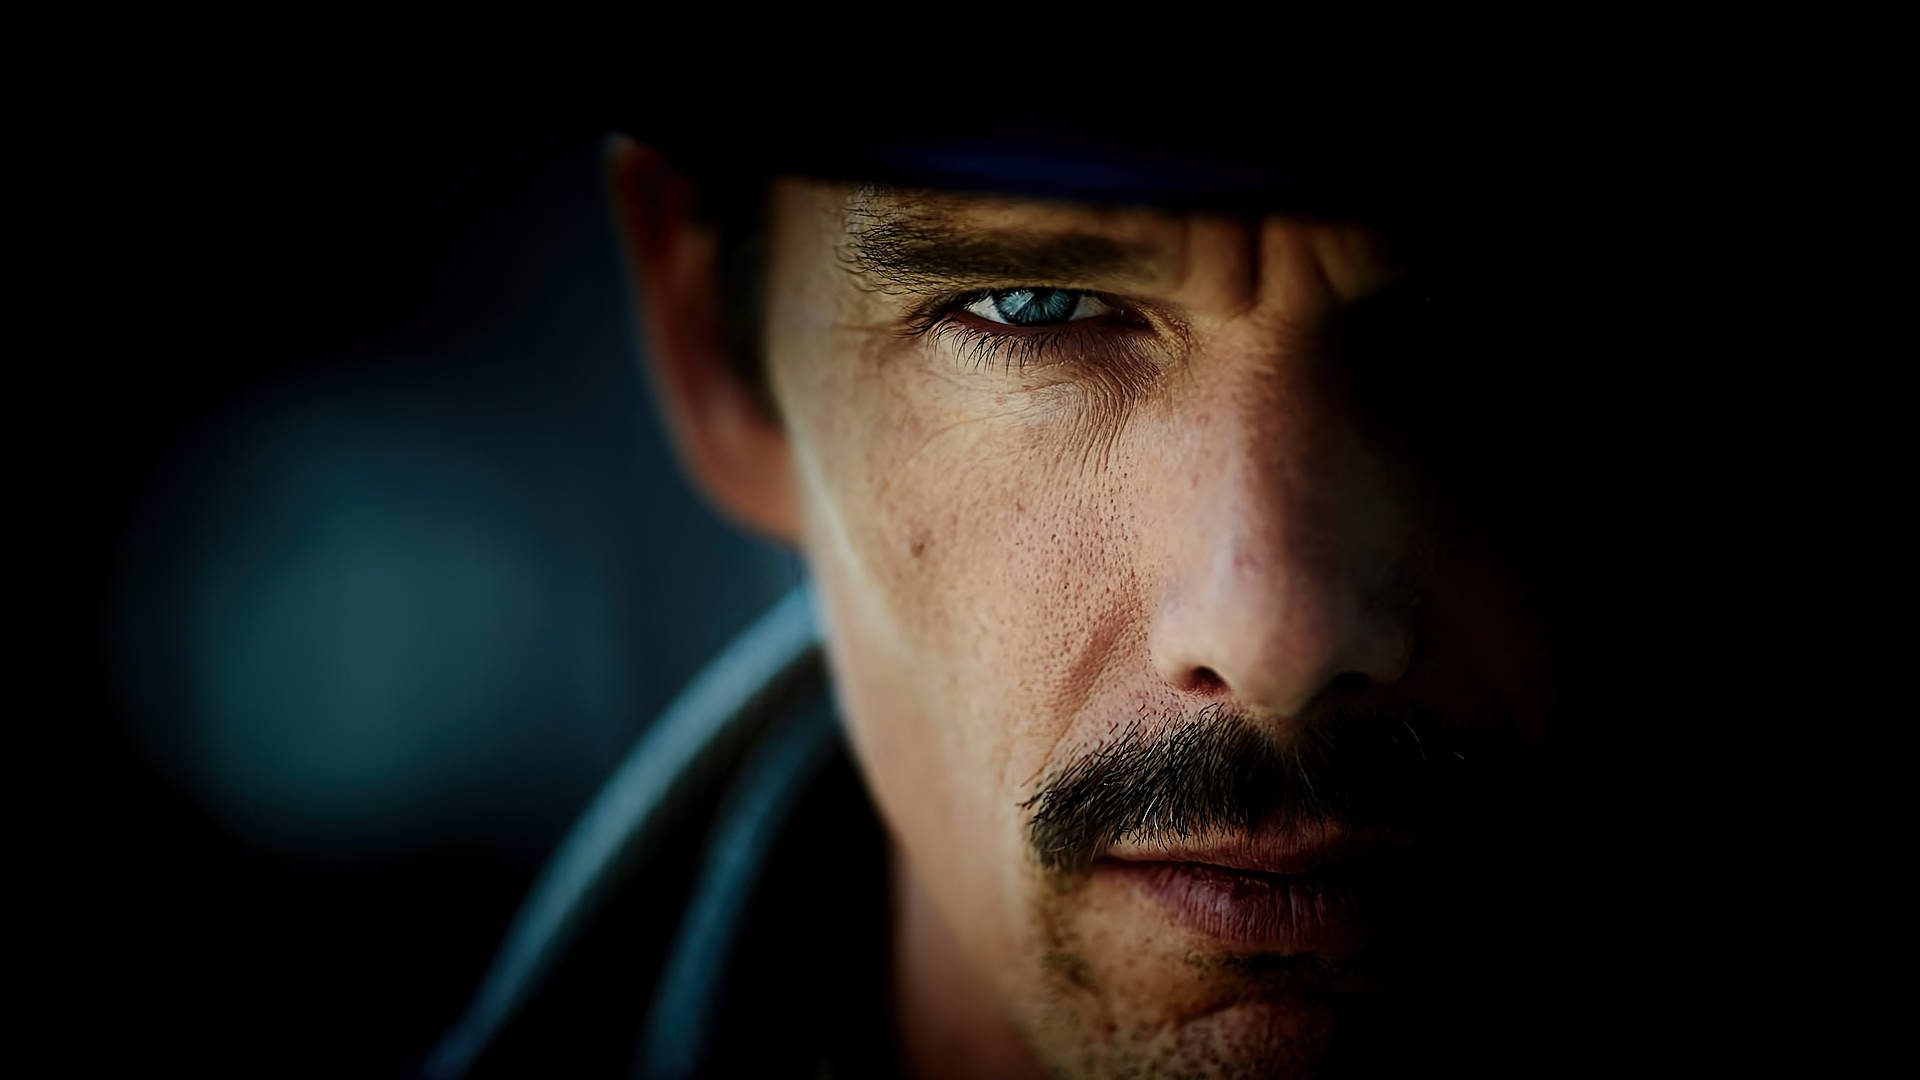 Ethan Hawke in a thriller scene from the Movie - Predestination Wallpaper